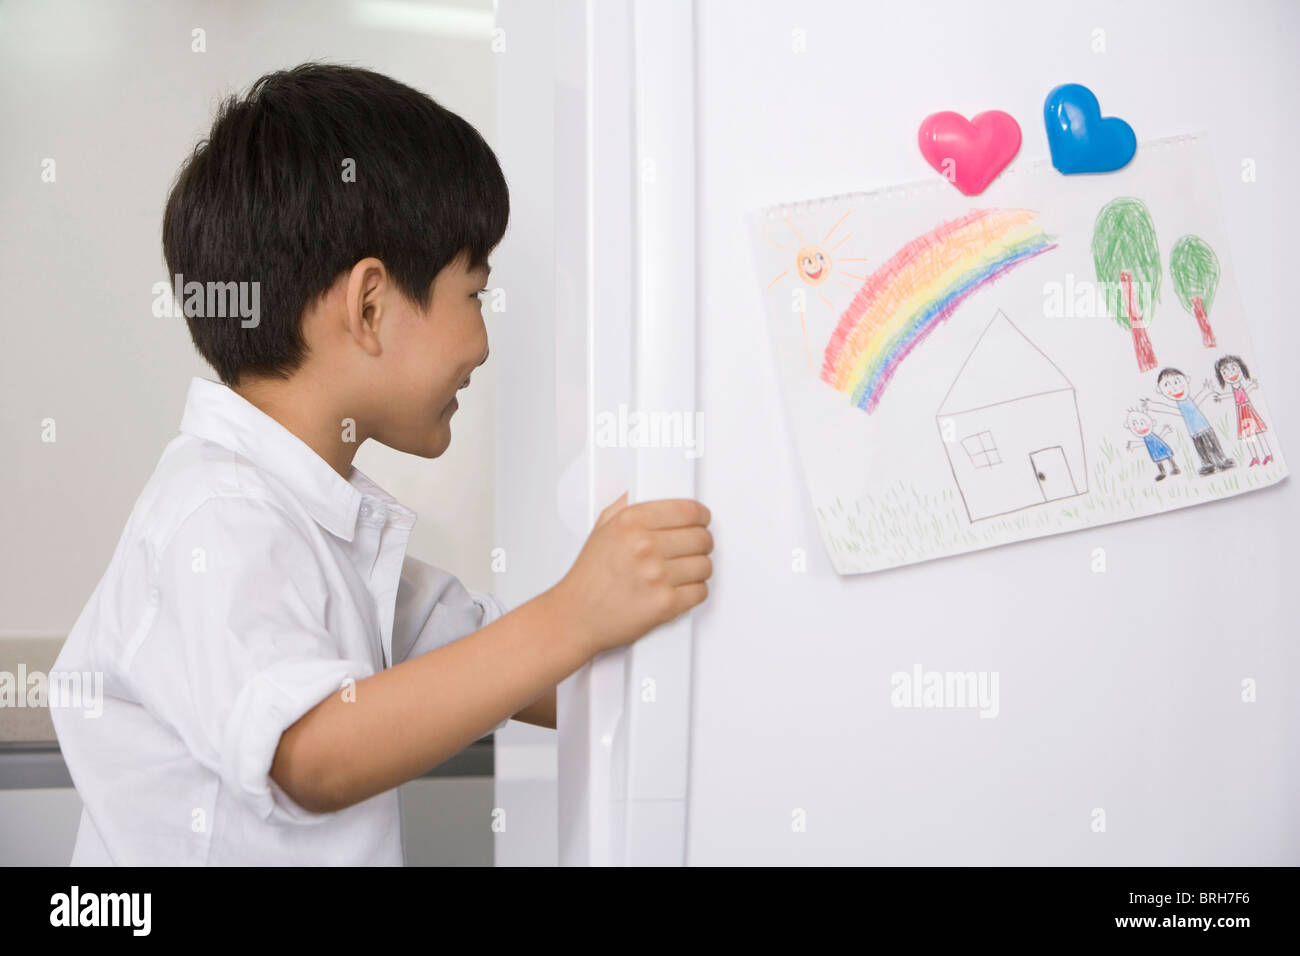 Young boy opening refrigerator Stock Photo